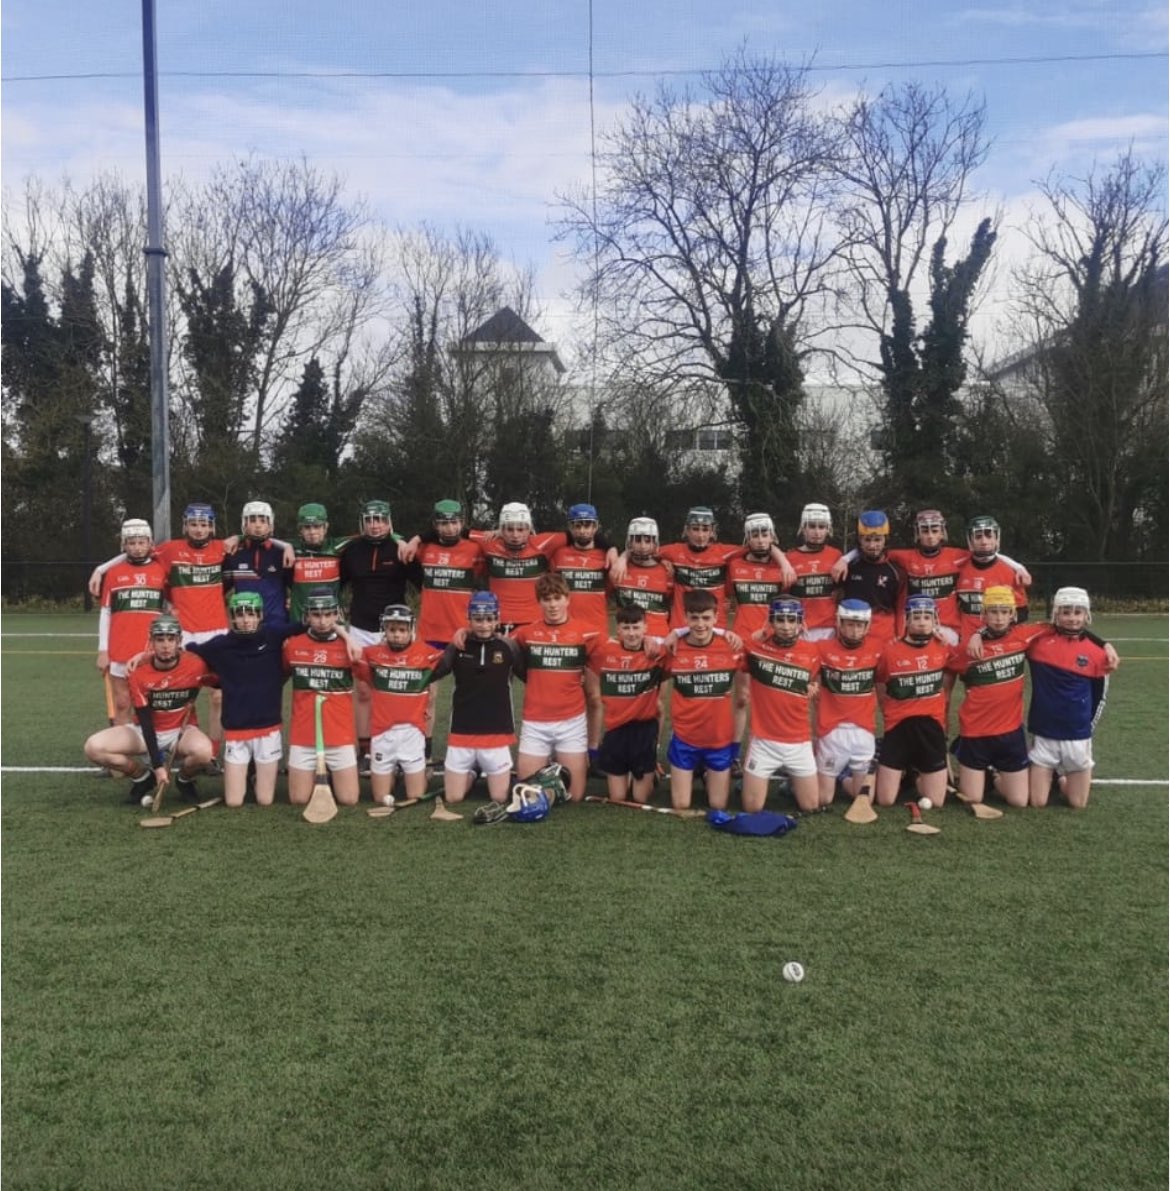 Congrats to our u15 hurlers who beat Coláiste Iosaef, Kilmallock today in UL on a scoreline of 8-12 to 3 points #cbsabú🔴🟢